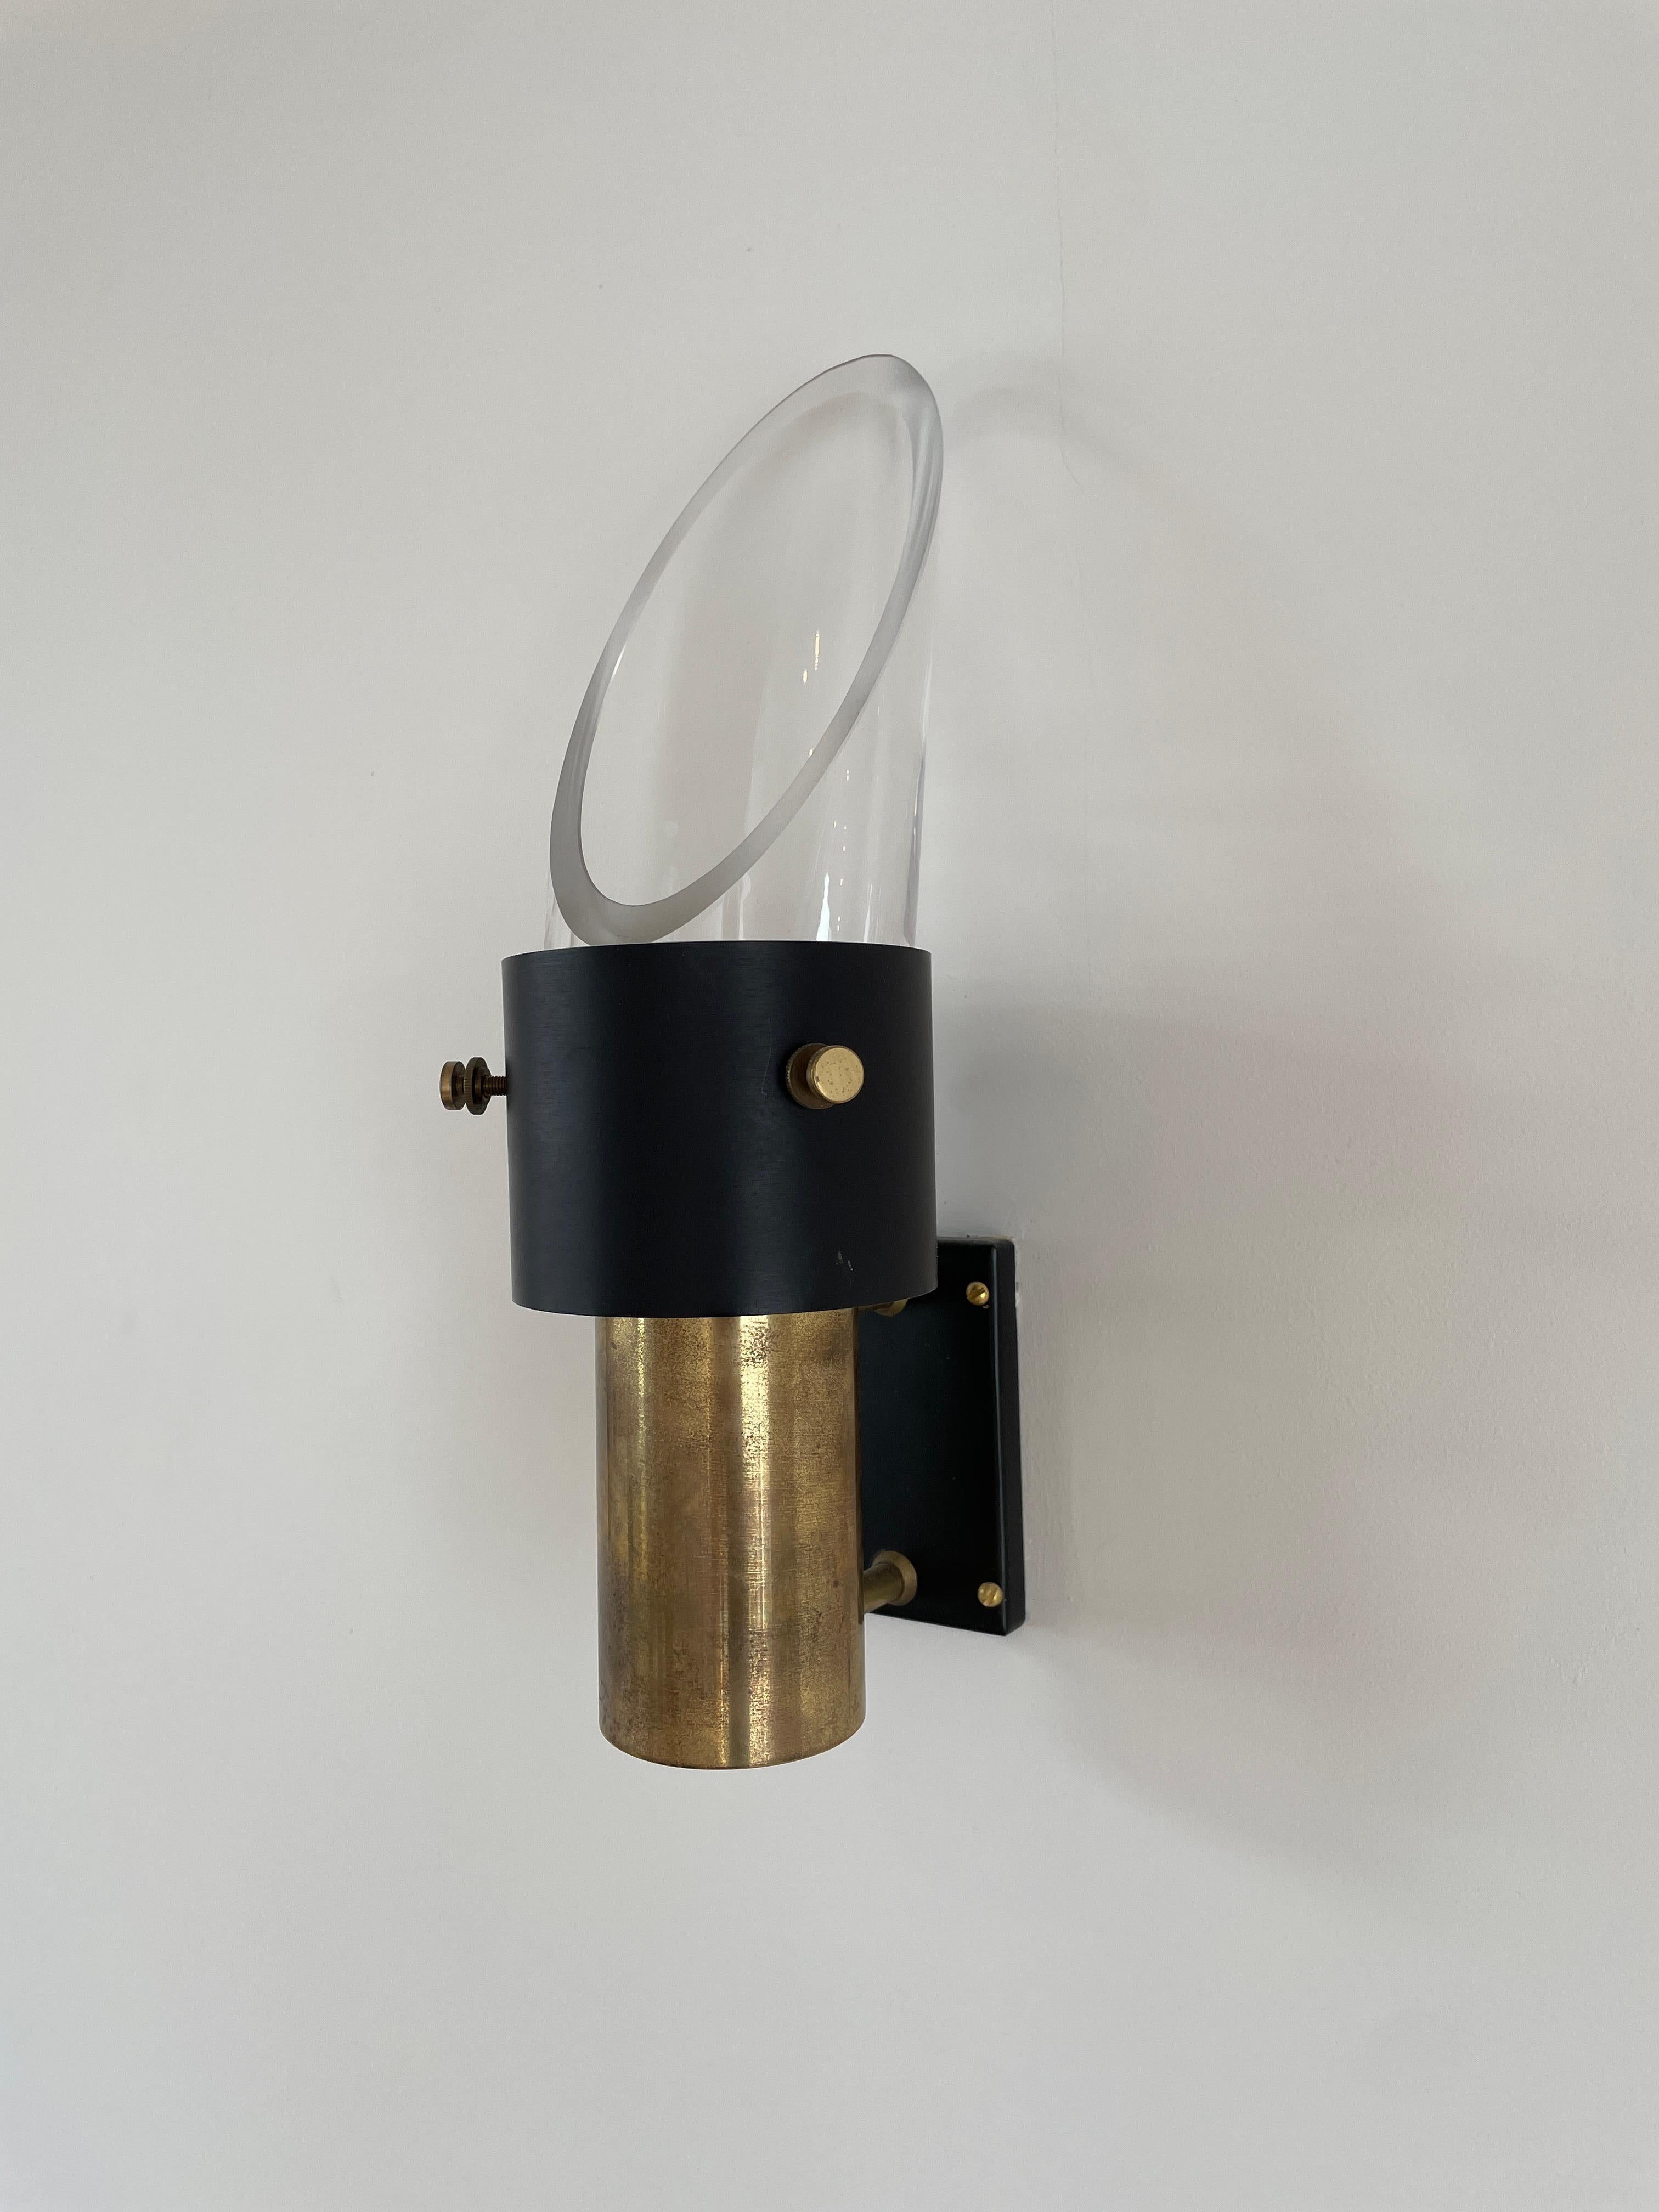 ‘SAGA’ WALL LIGHTS by Kai Korbing In Good Condition For Sale In London, England